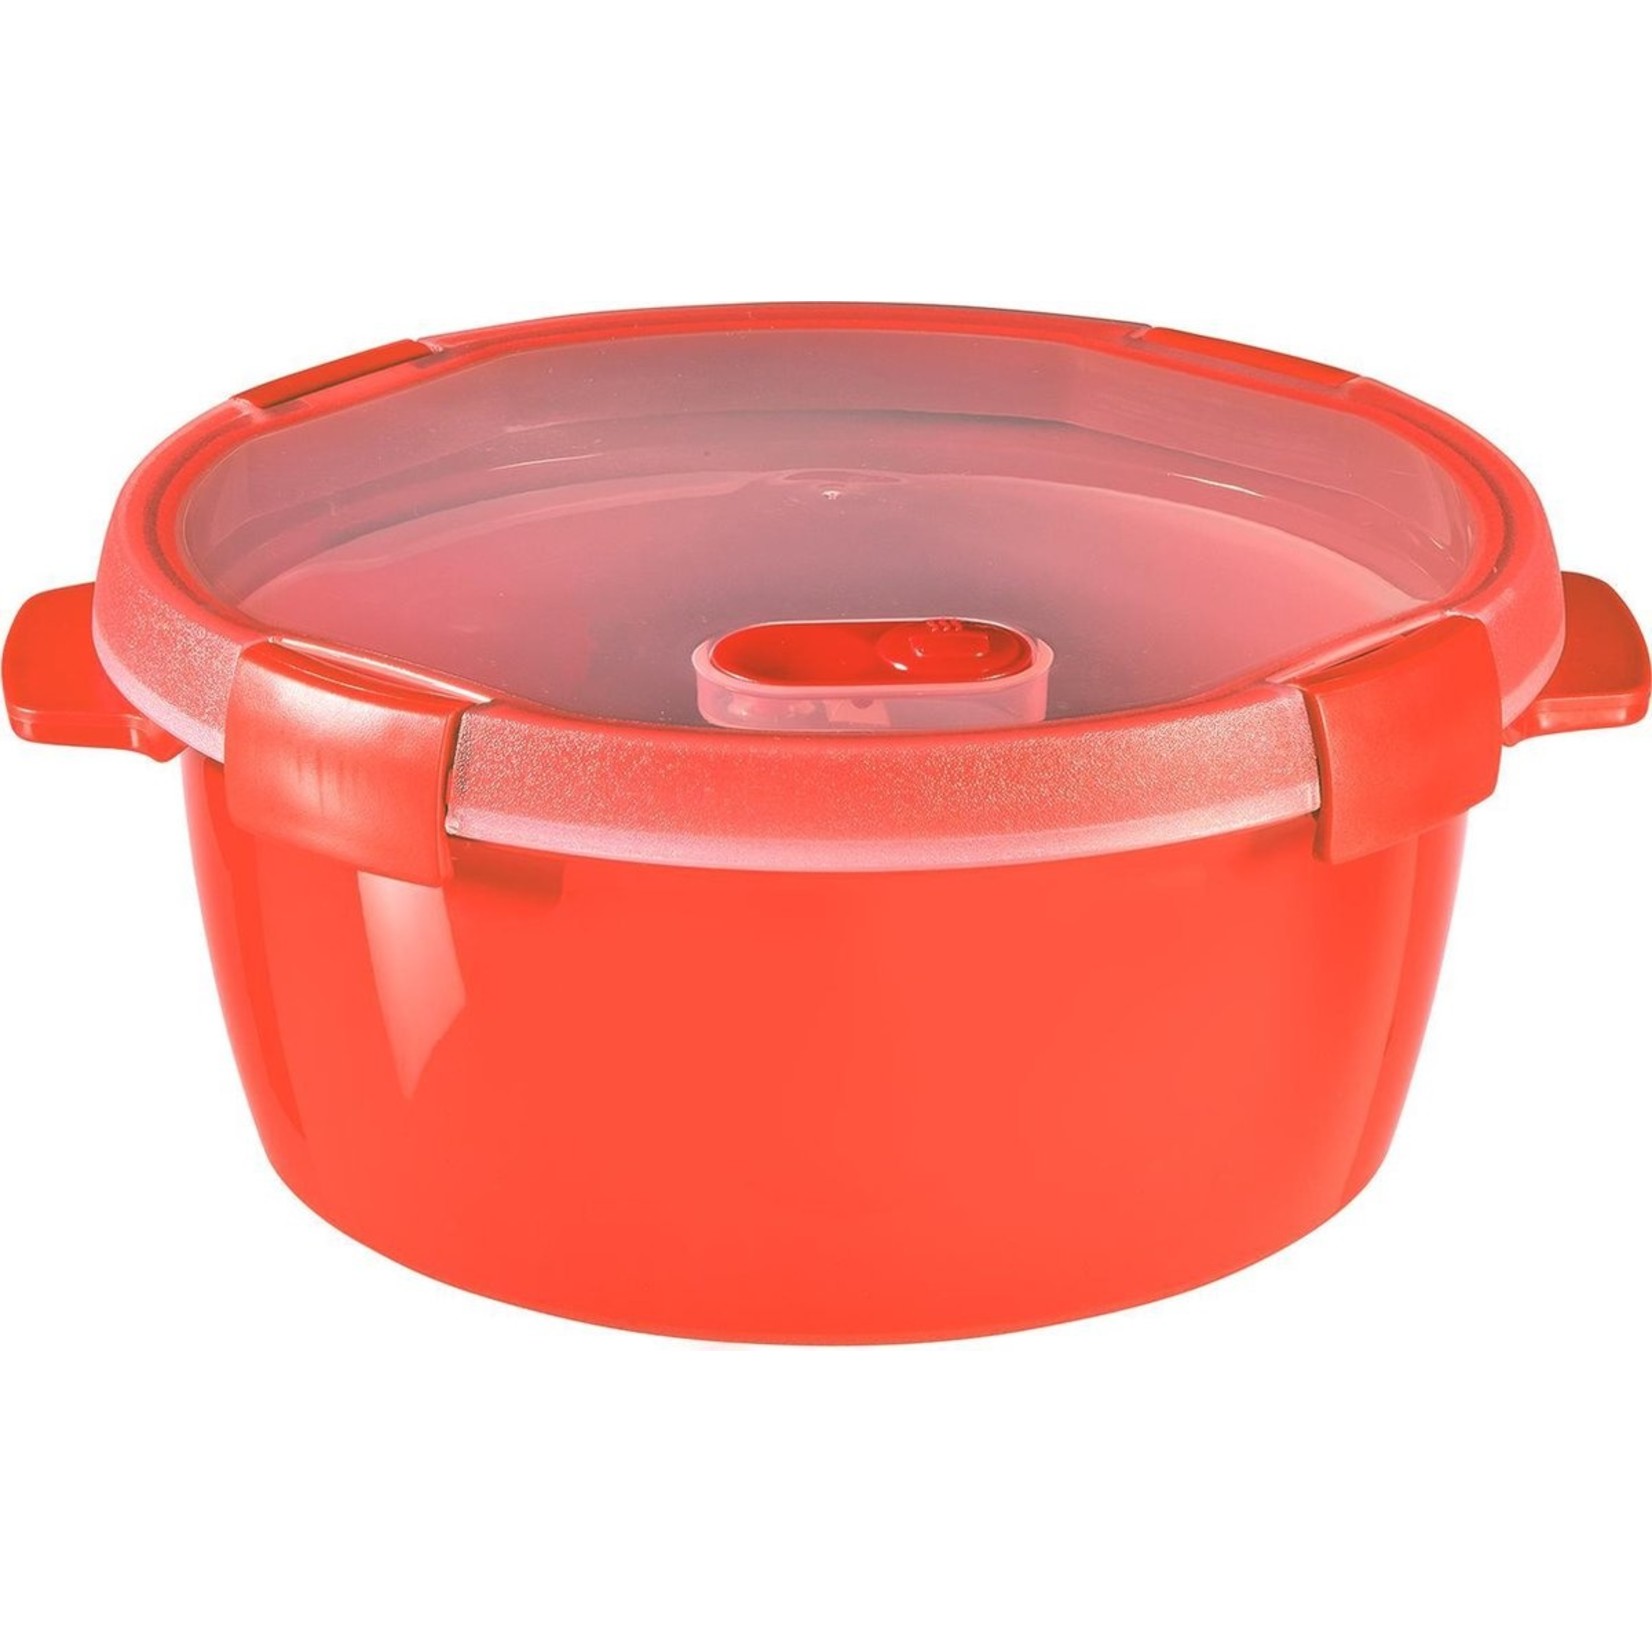 Curver Smart Microwave Eco Steamer Rond 1,6L + Stoomtray - Rood